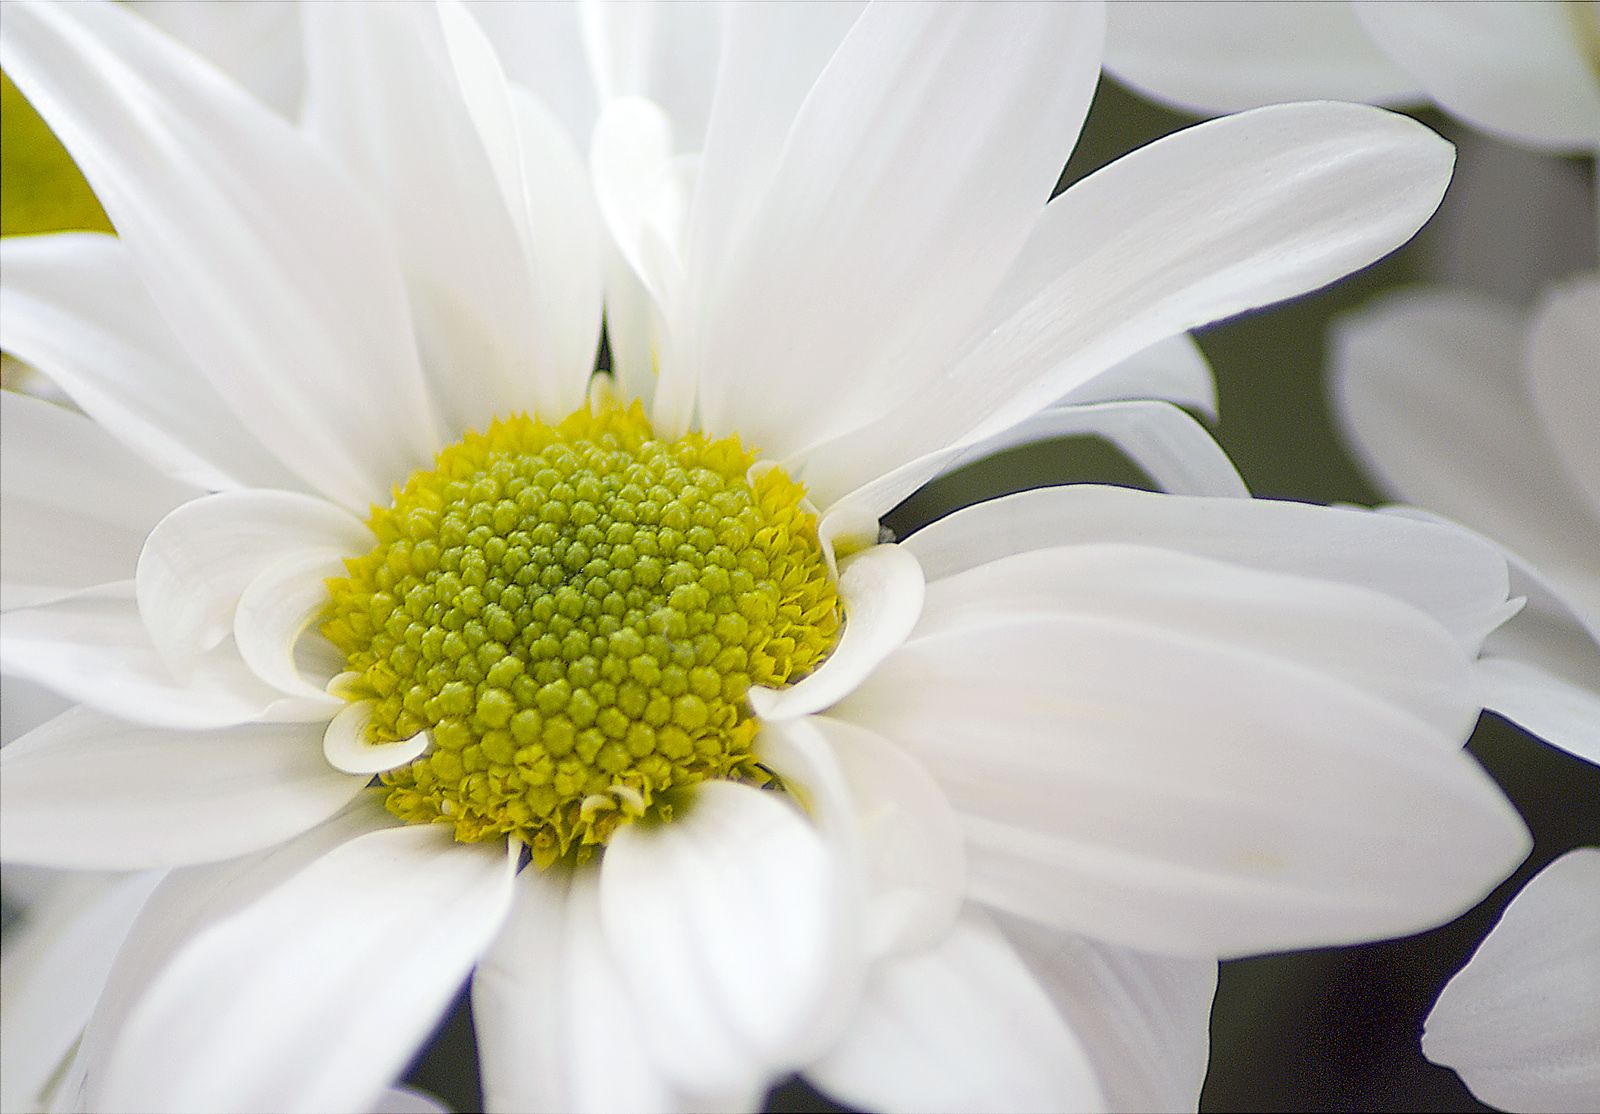 white daisy with yellow center sits in a bunch of other daisies